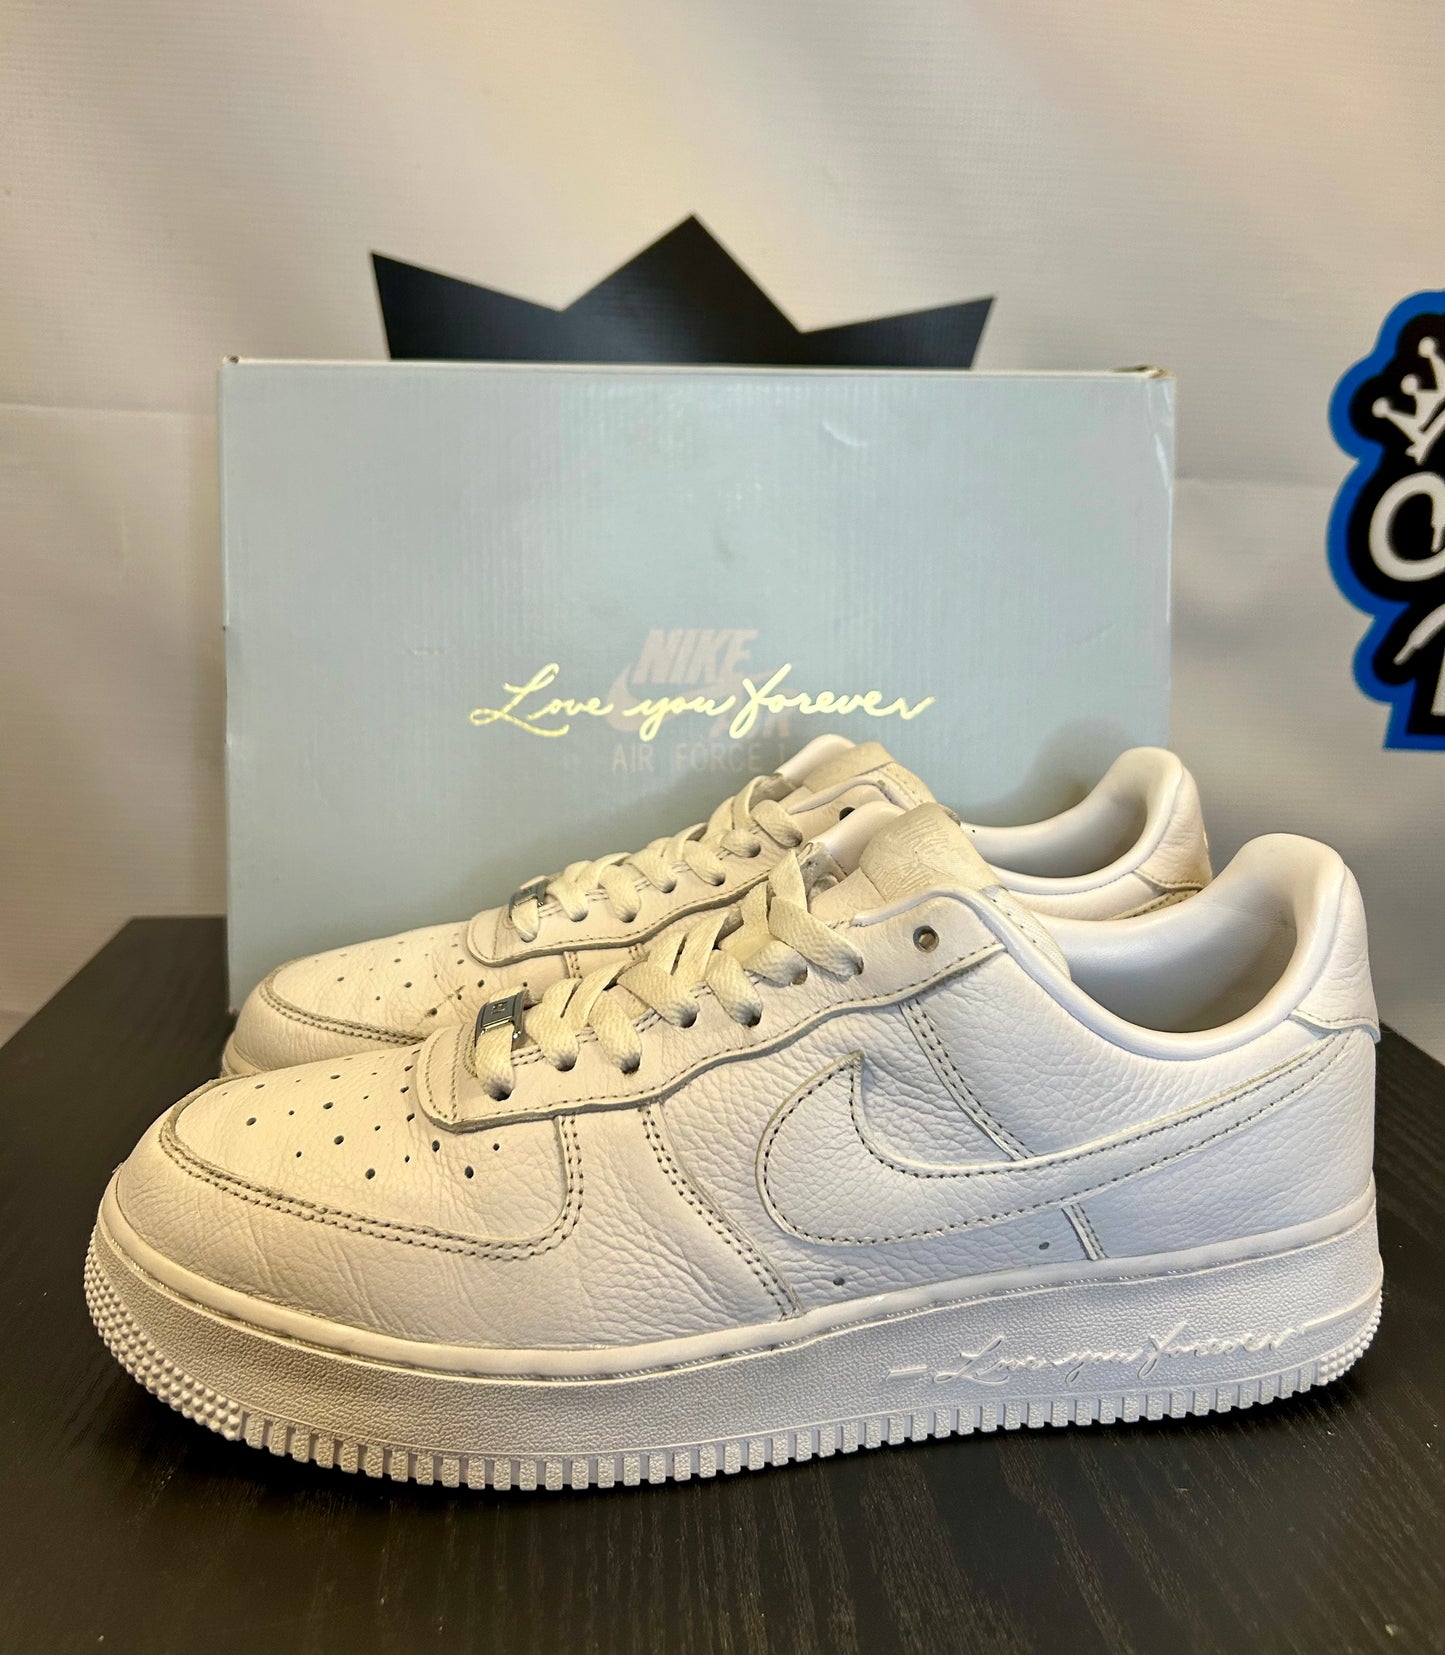 Nike Air Force 1 Low SP Drake NOCTA Certified Lover Boy CLB (Pre-Owned)